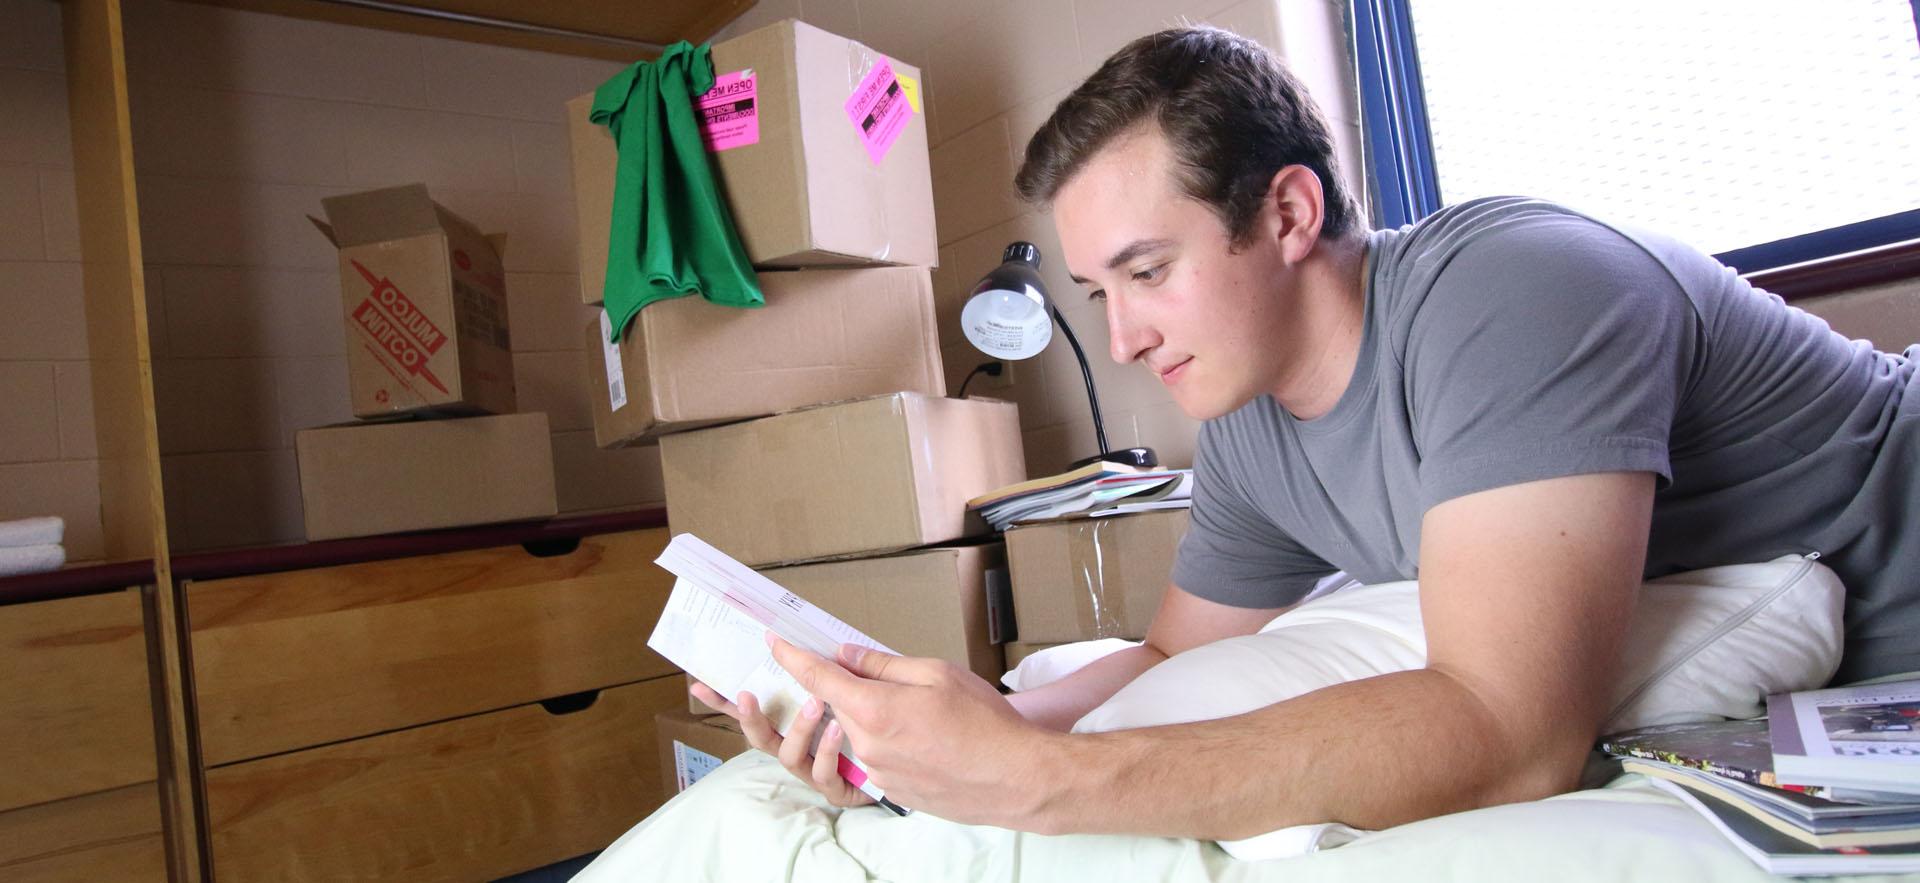 Boy looking at book laying on bed